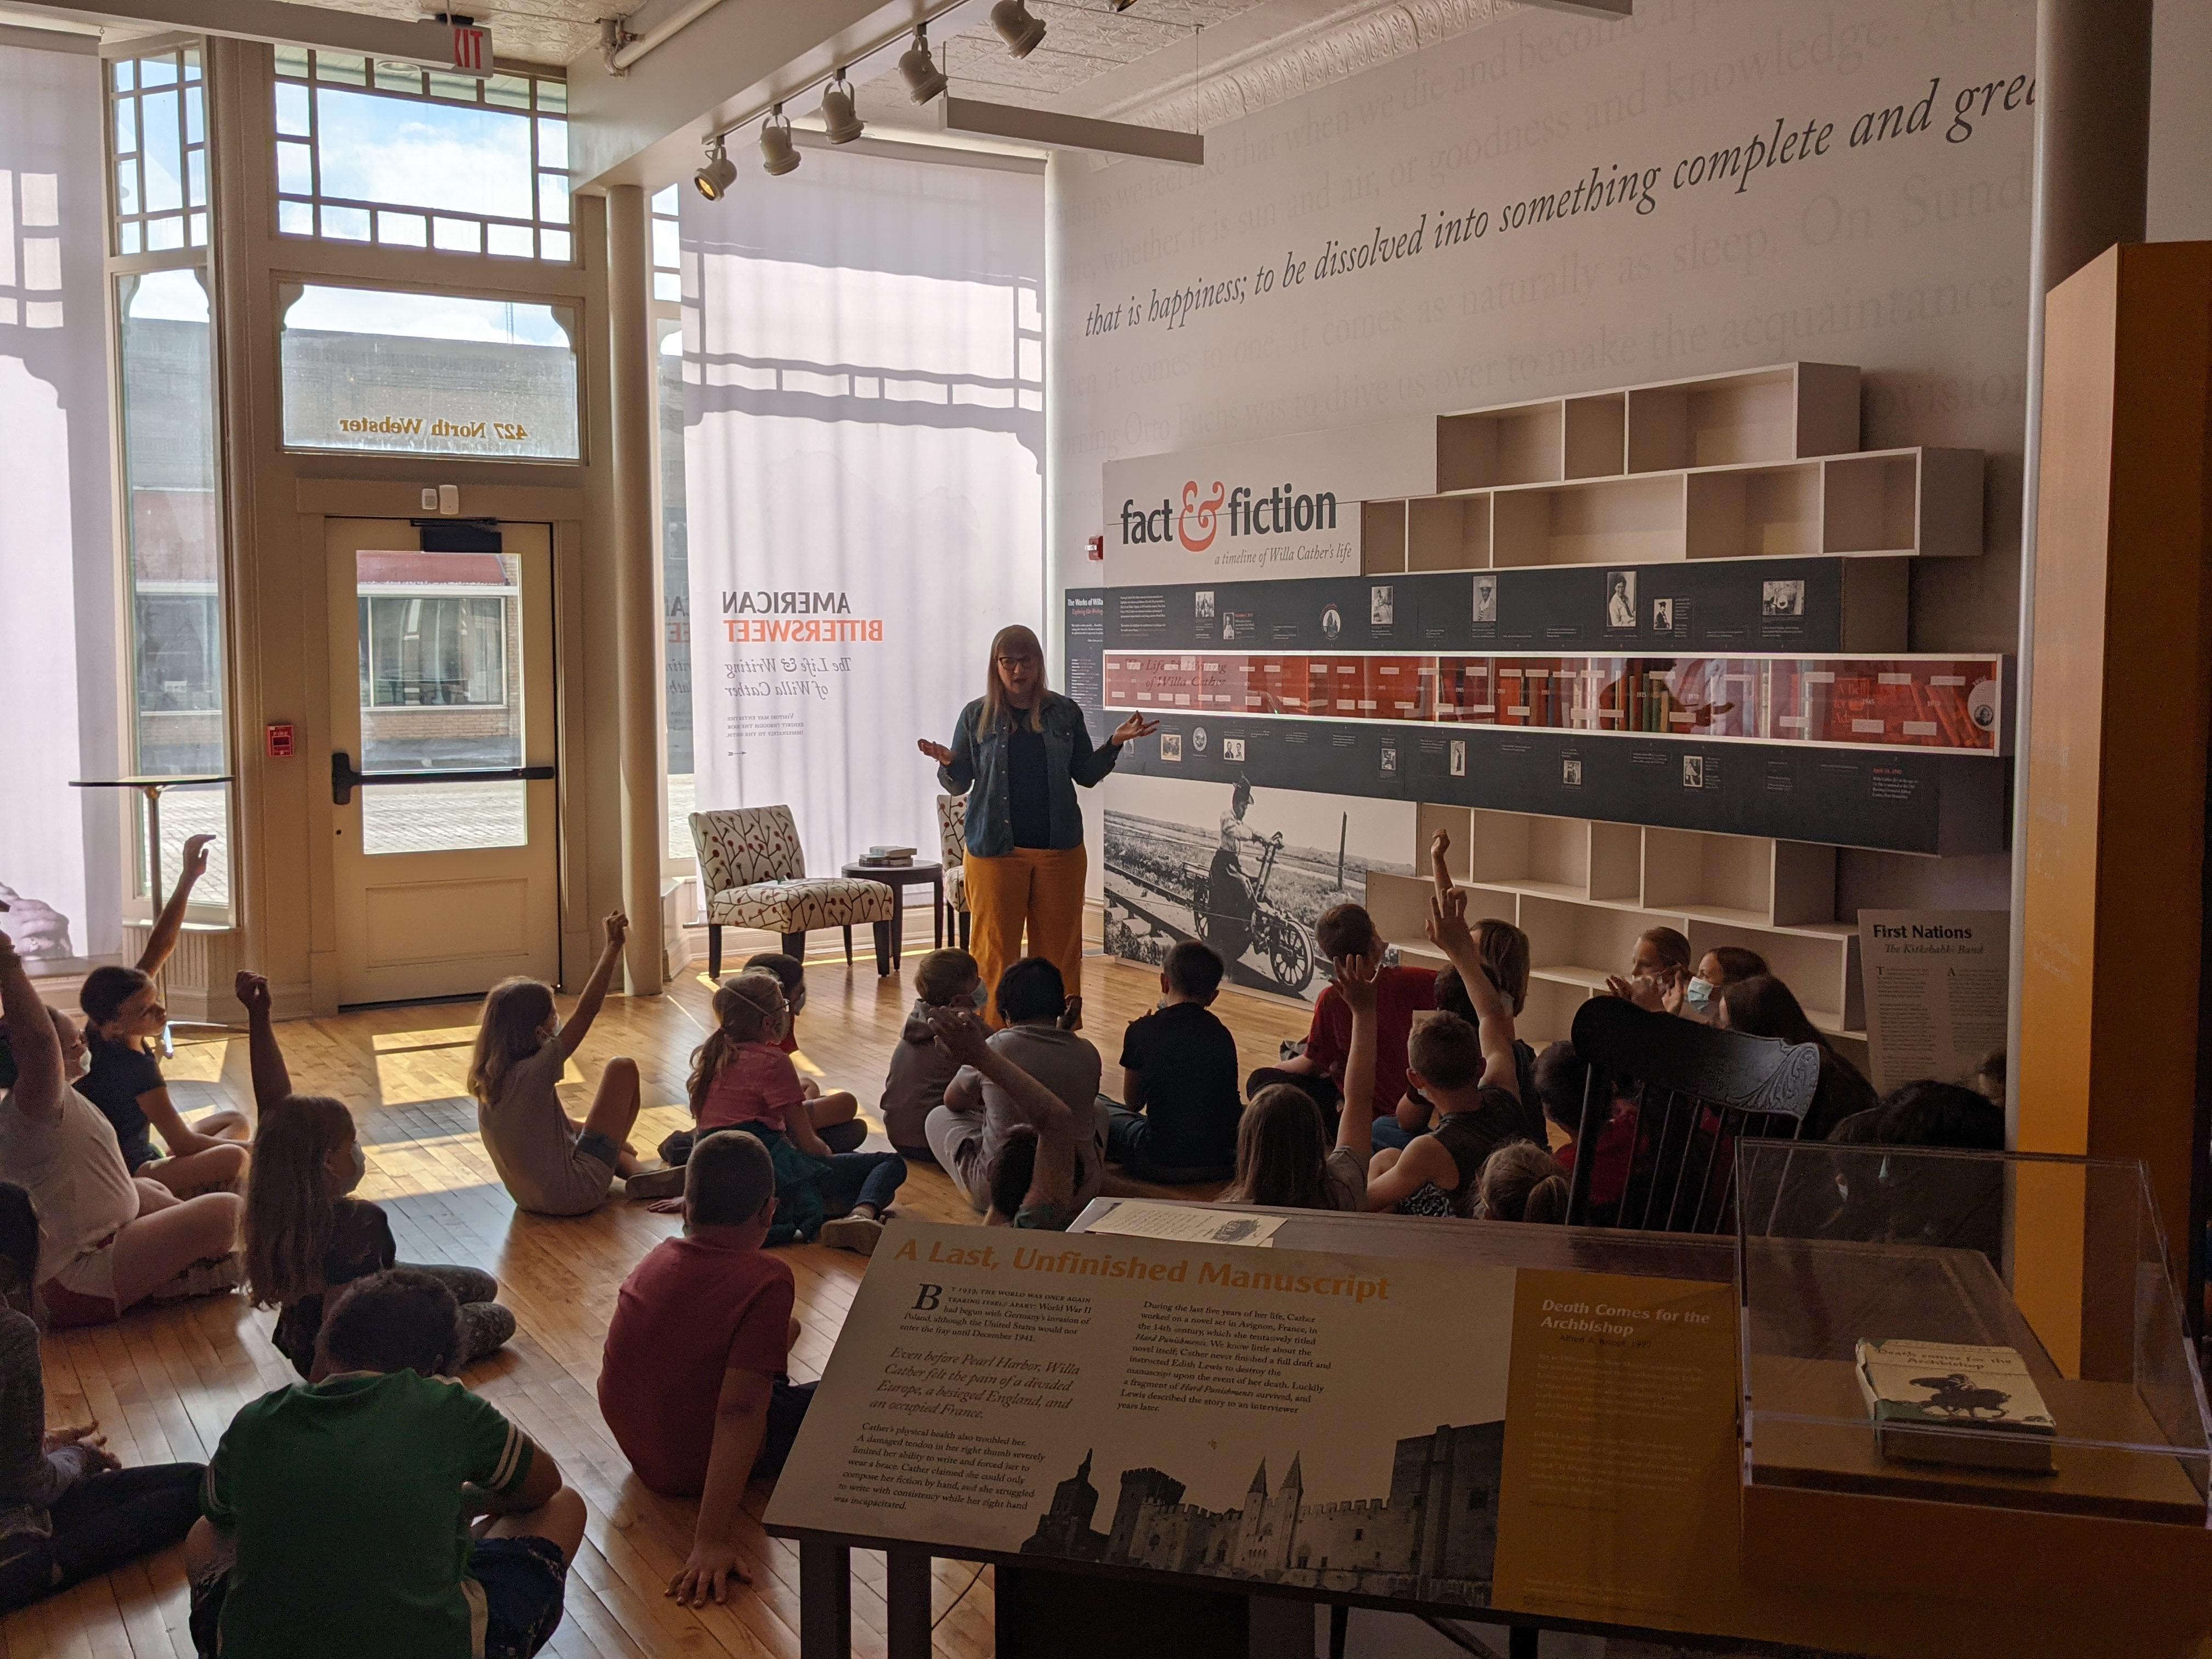 Education Director, Rachel Olson, speaks to a group of students sitting in front of a display in museum.